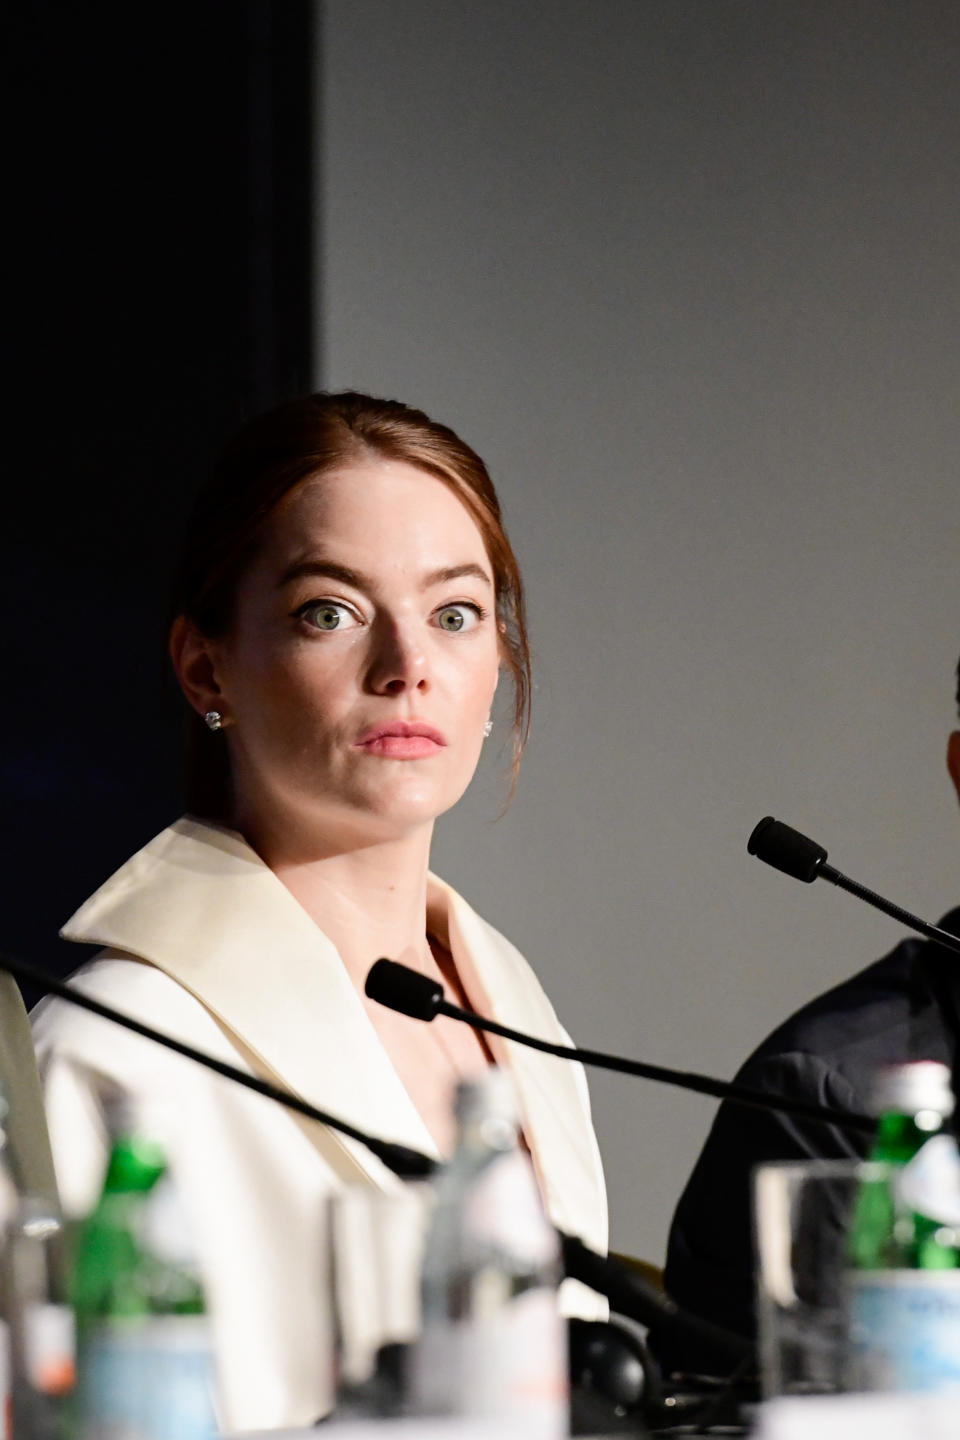 Emma Stone at a press conference, wearing a white blazer, with an attentive expression, seated at a table with microphones and water bottles